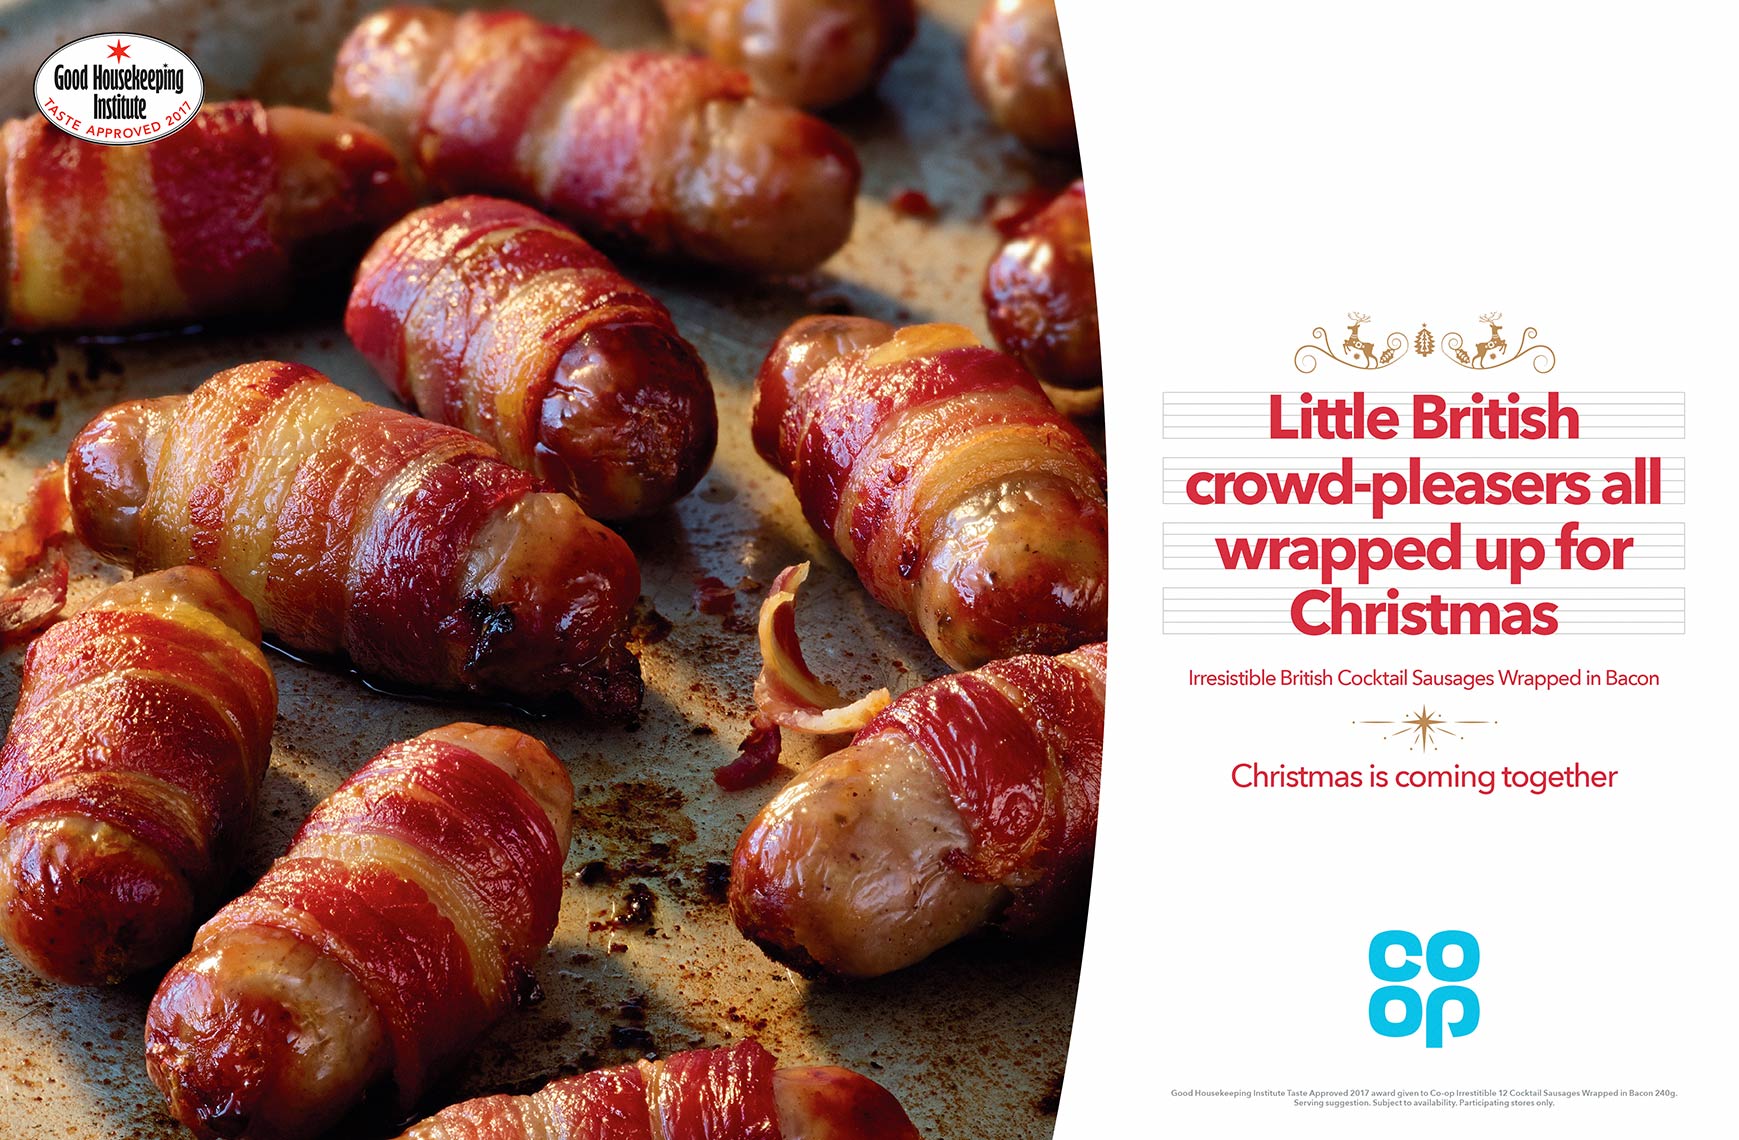 Co-Op Christmas Pigs in Blankets | Colin Campbell-Food Photographer